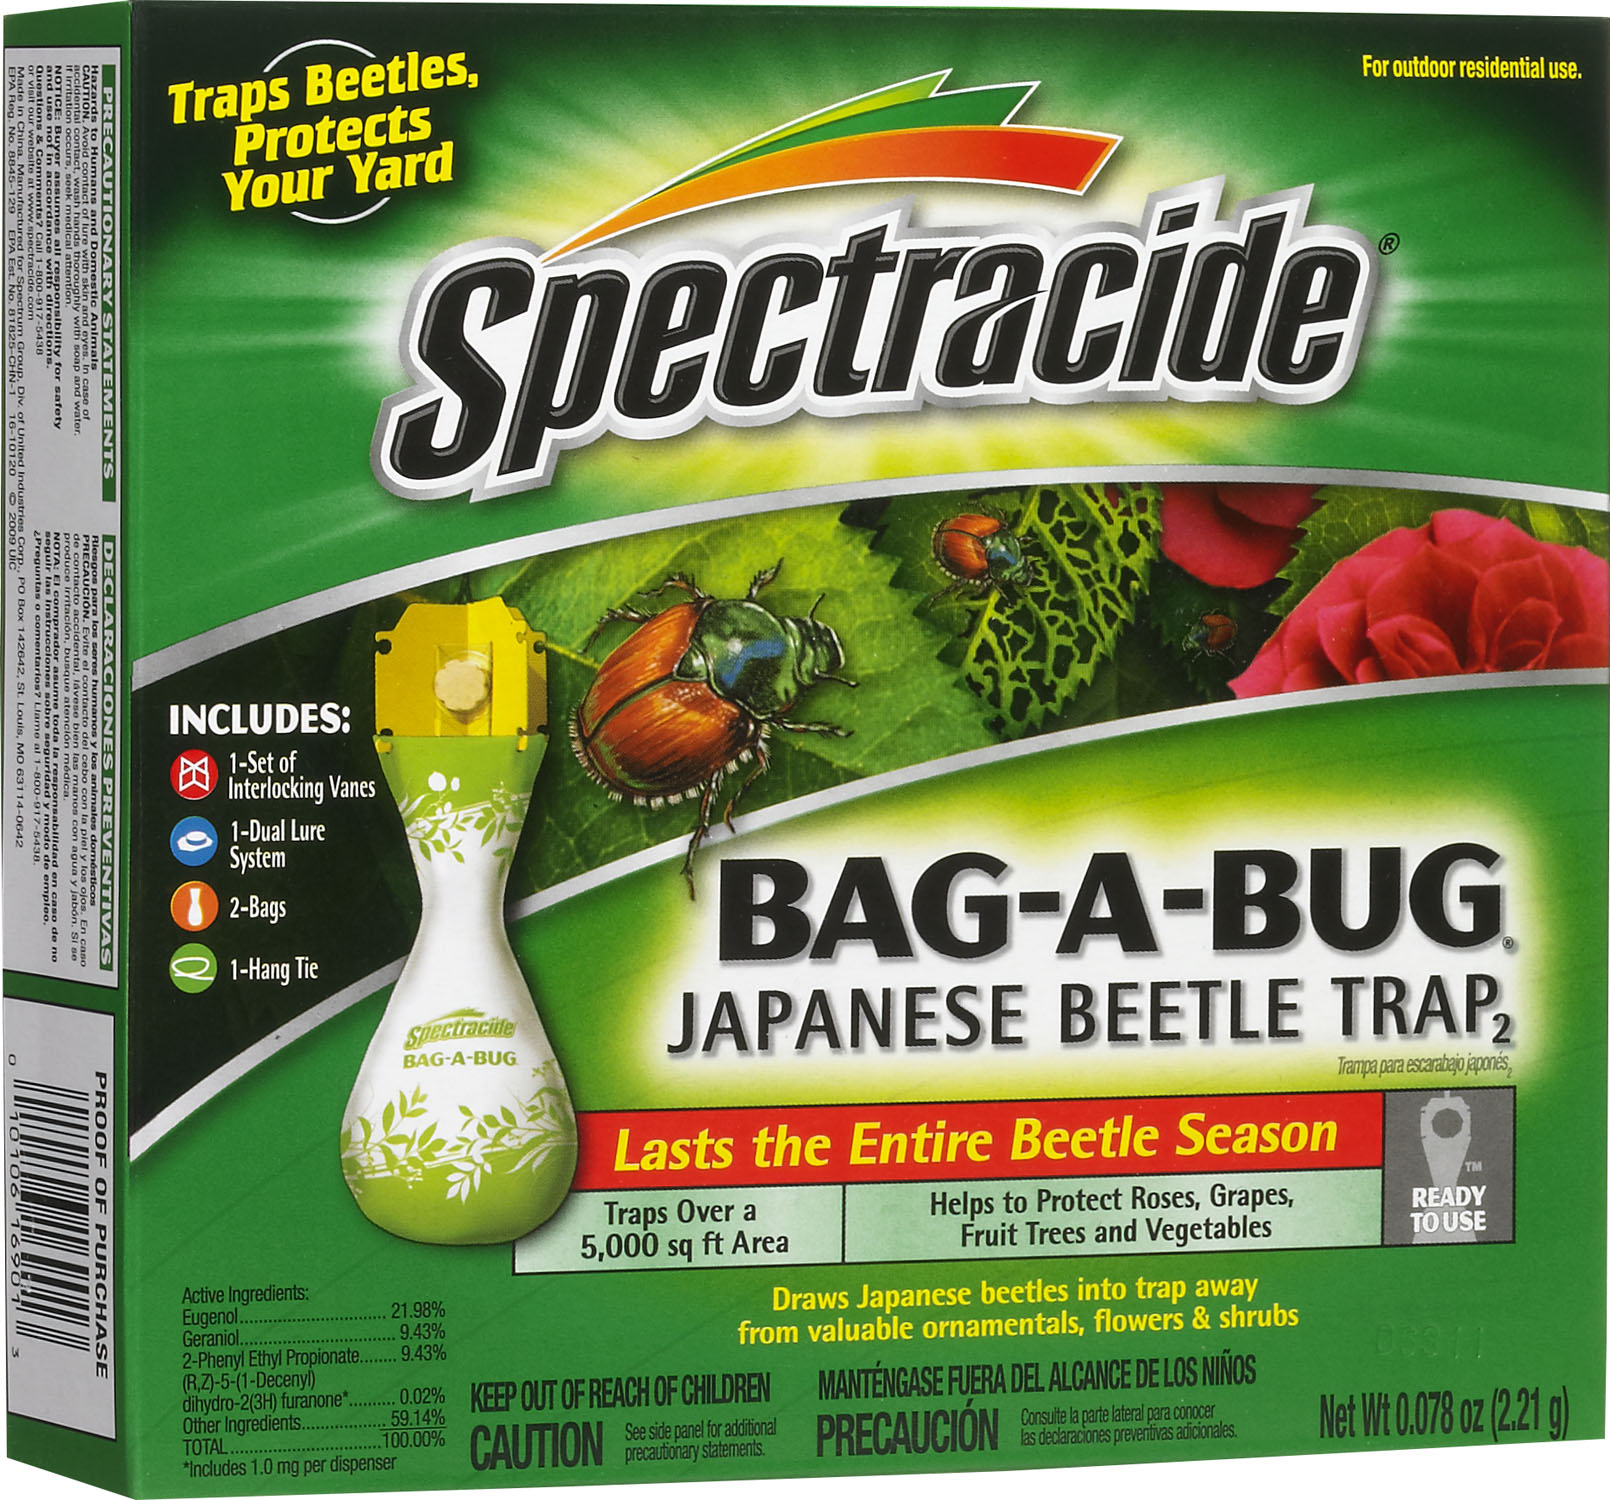 Pack of 2 Spectracide Bag-A-Bug Japanese Beetle Trap 